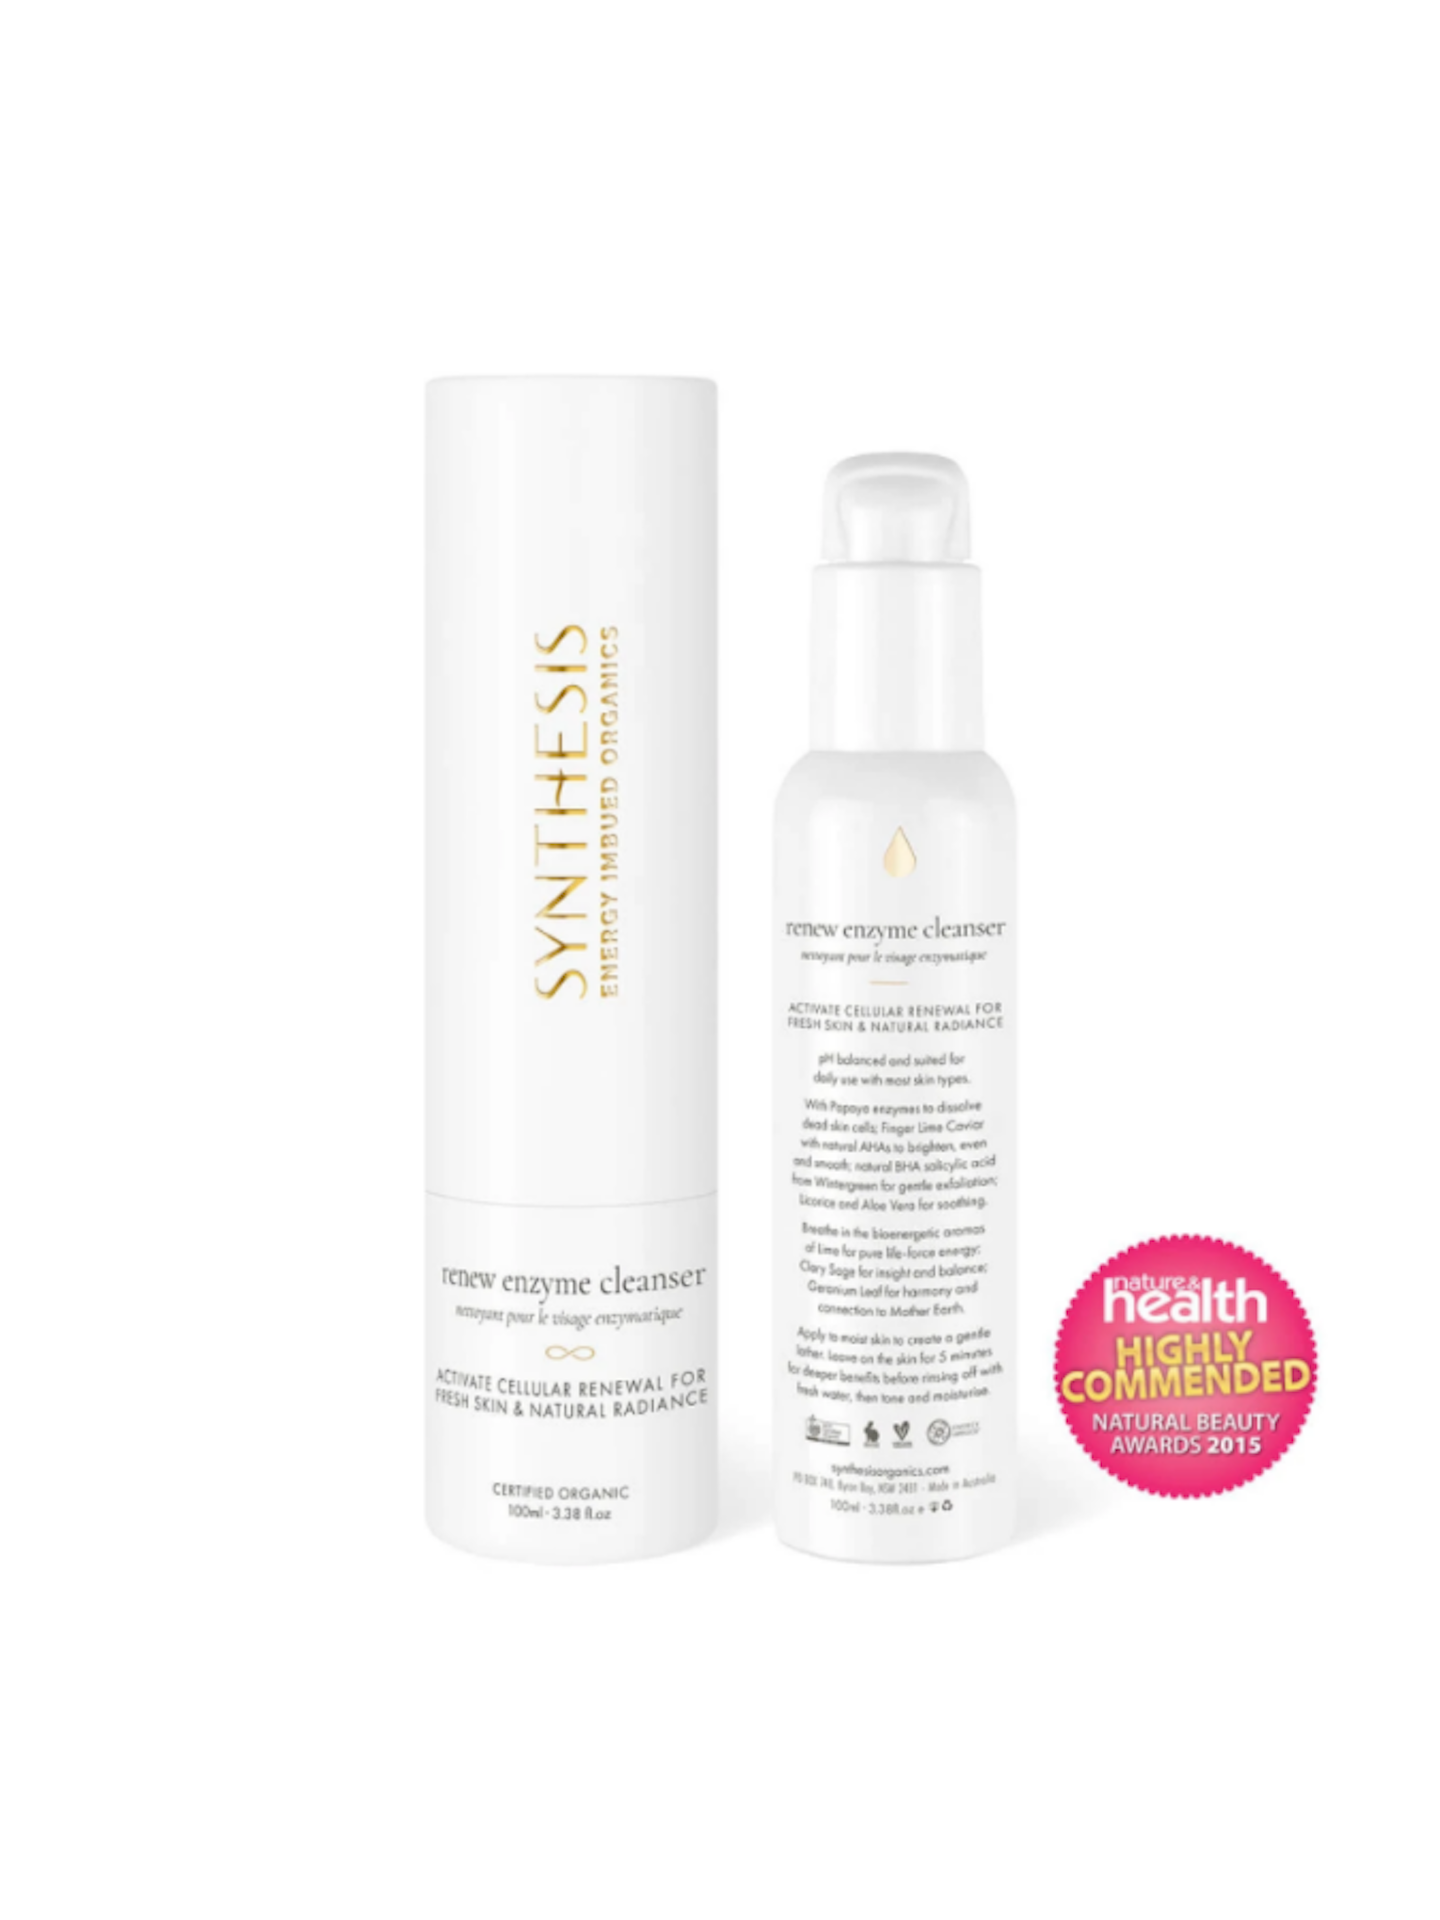 synthesis organics renew enzyme cleanser